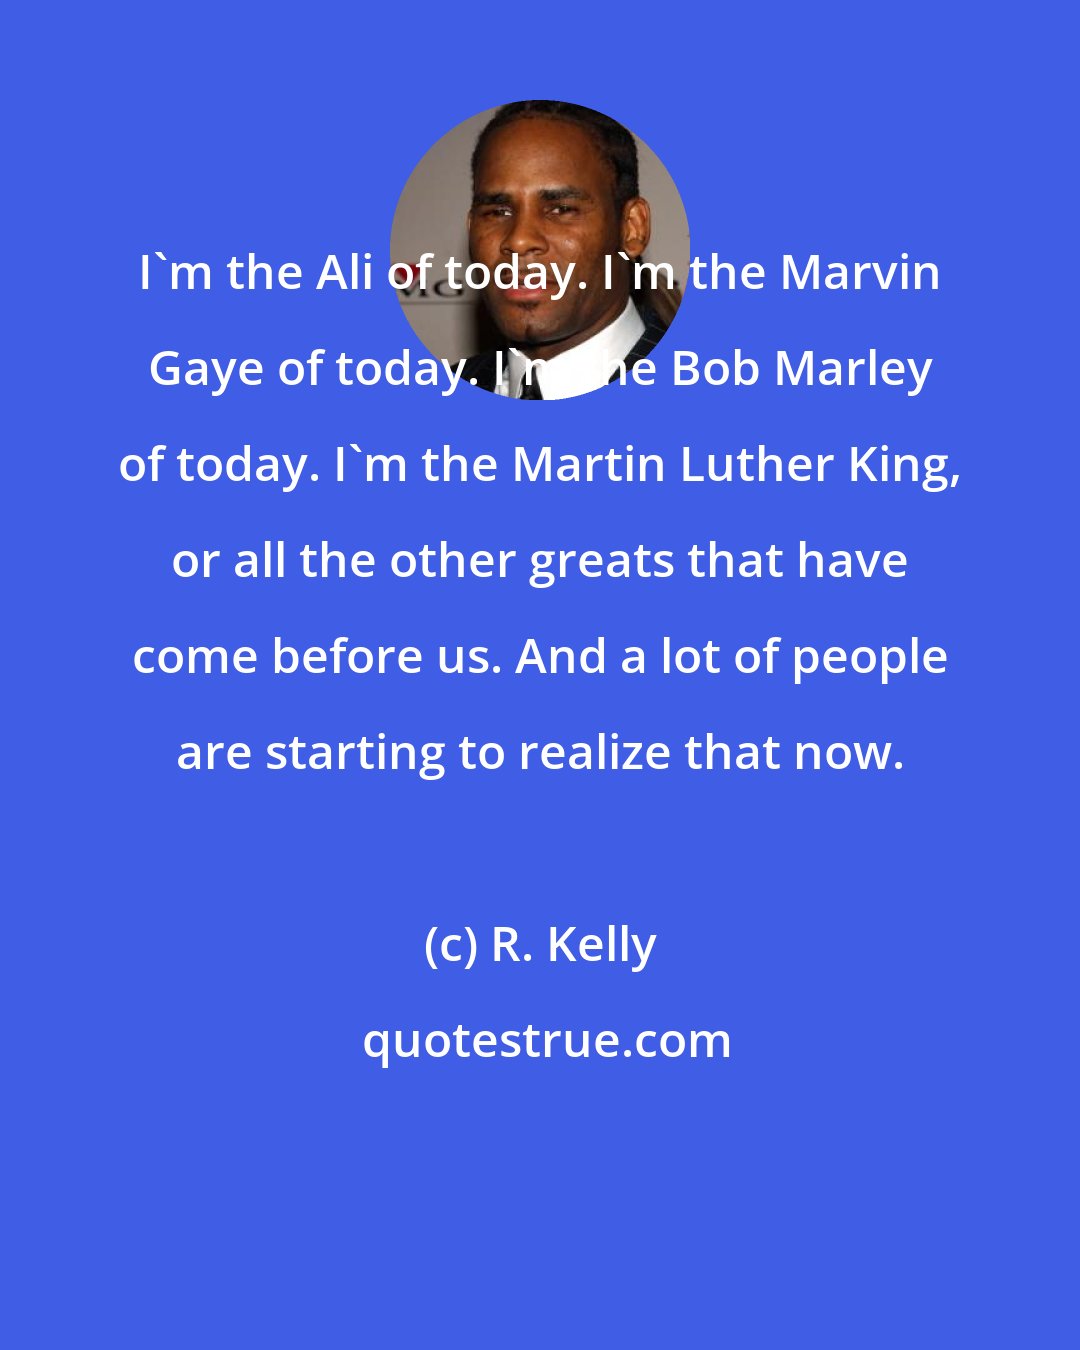 R. Kelly: I'm the Ali of today. I'm the Marvin Gaye of today. I'm the Bob Marley of today. I'm the Martin Luther King, or all the other greats that have come before us. And a lot of people are starting to realize that now.